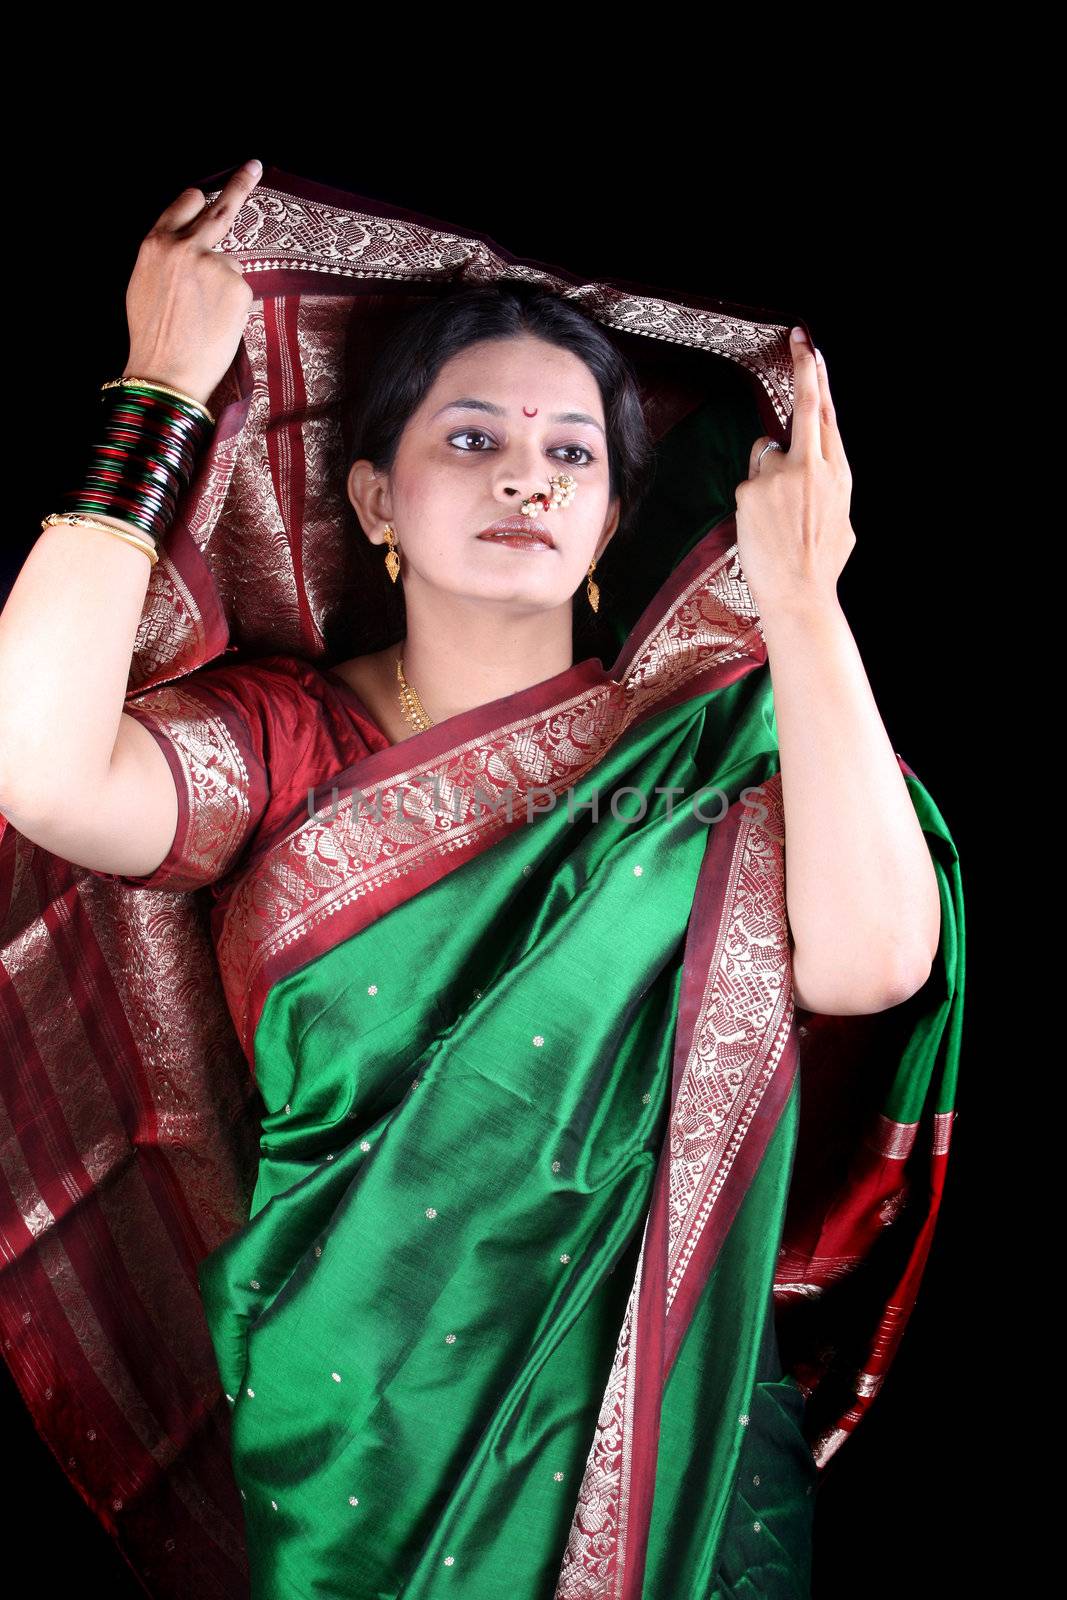 An Indian woman wearing her traditional green sari, on black studio background.